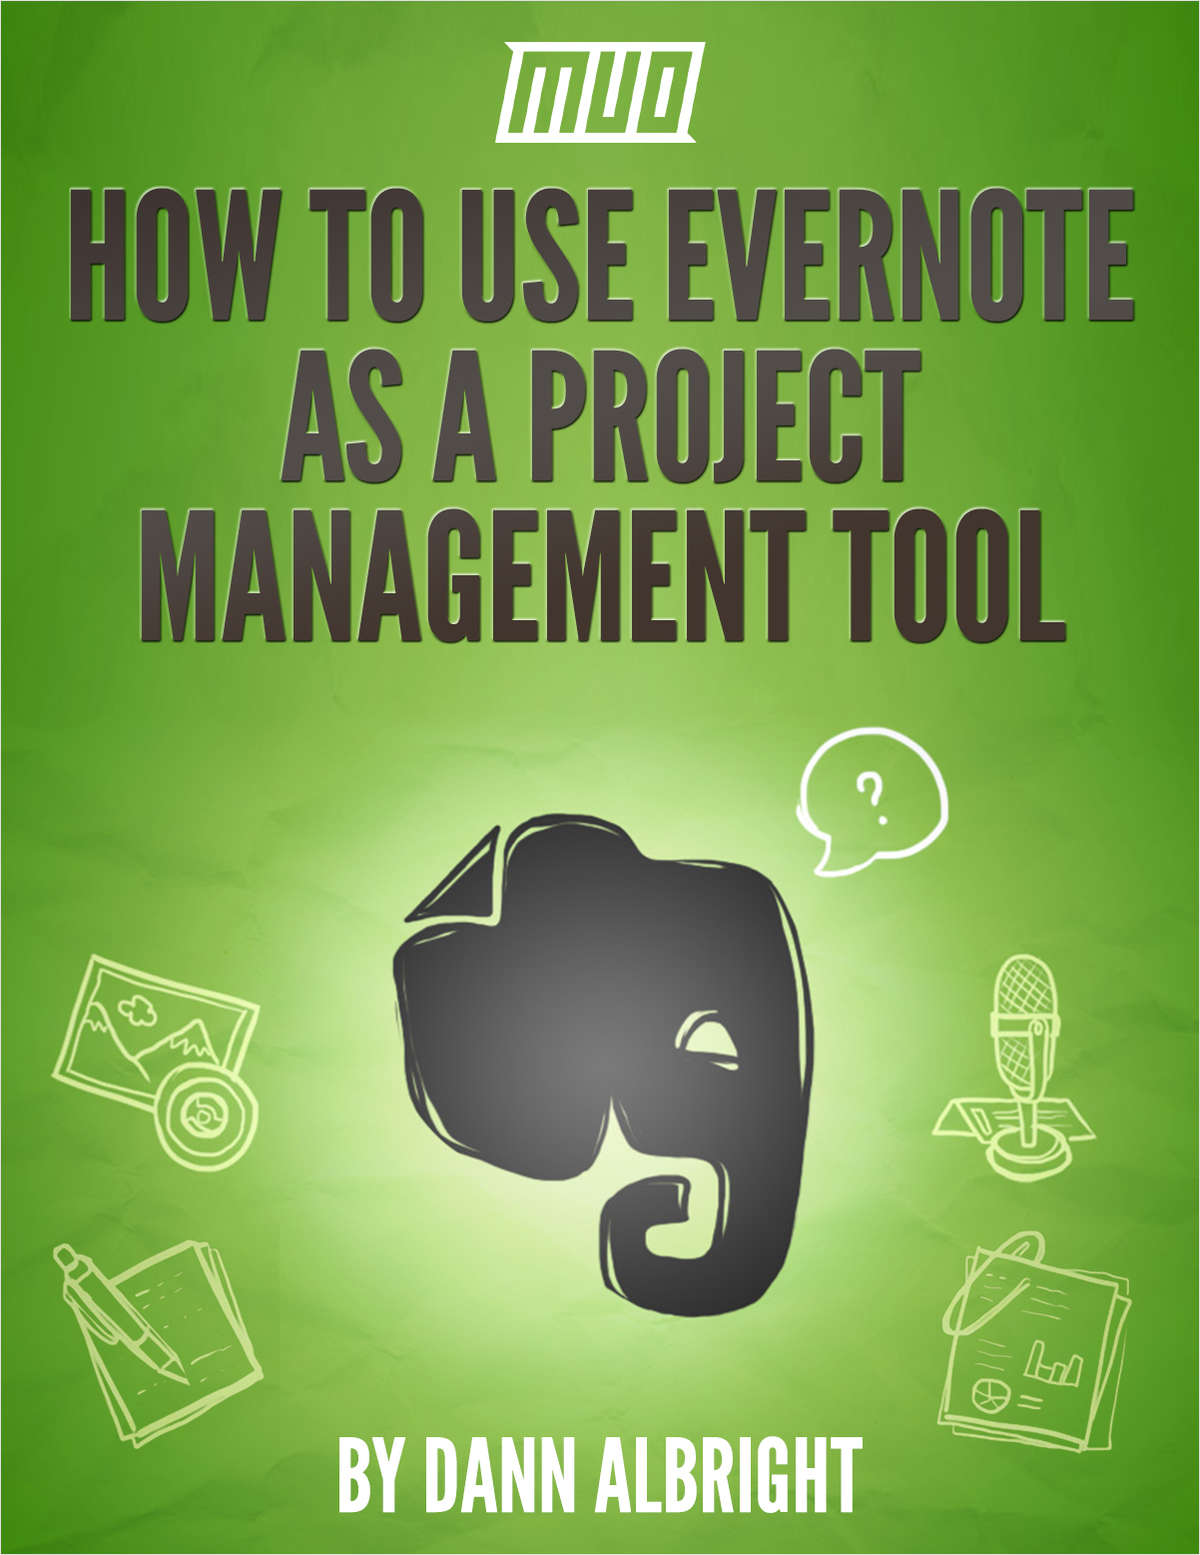 How to Use Evernote as a Project Management Tool